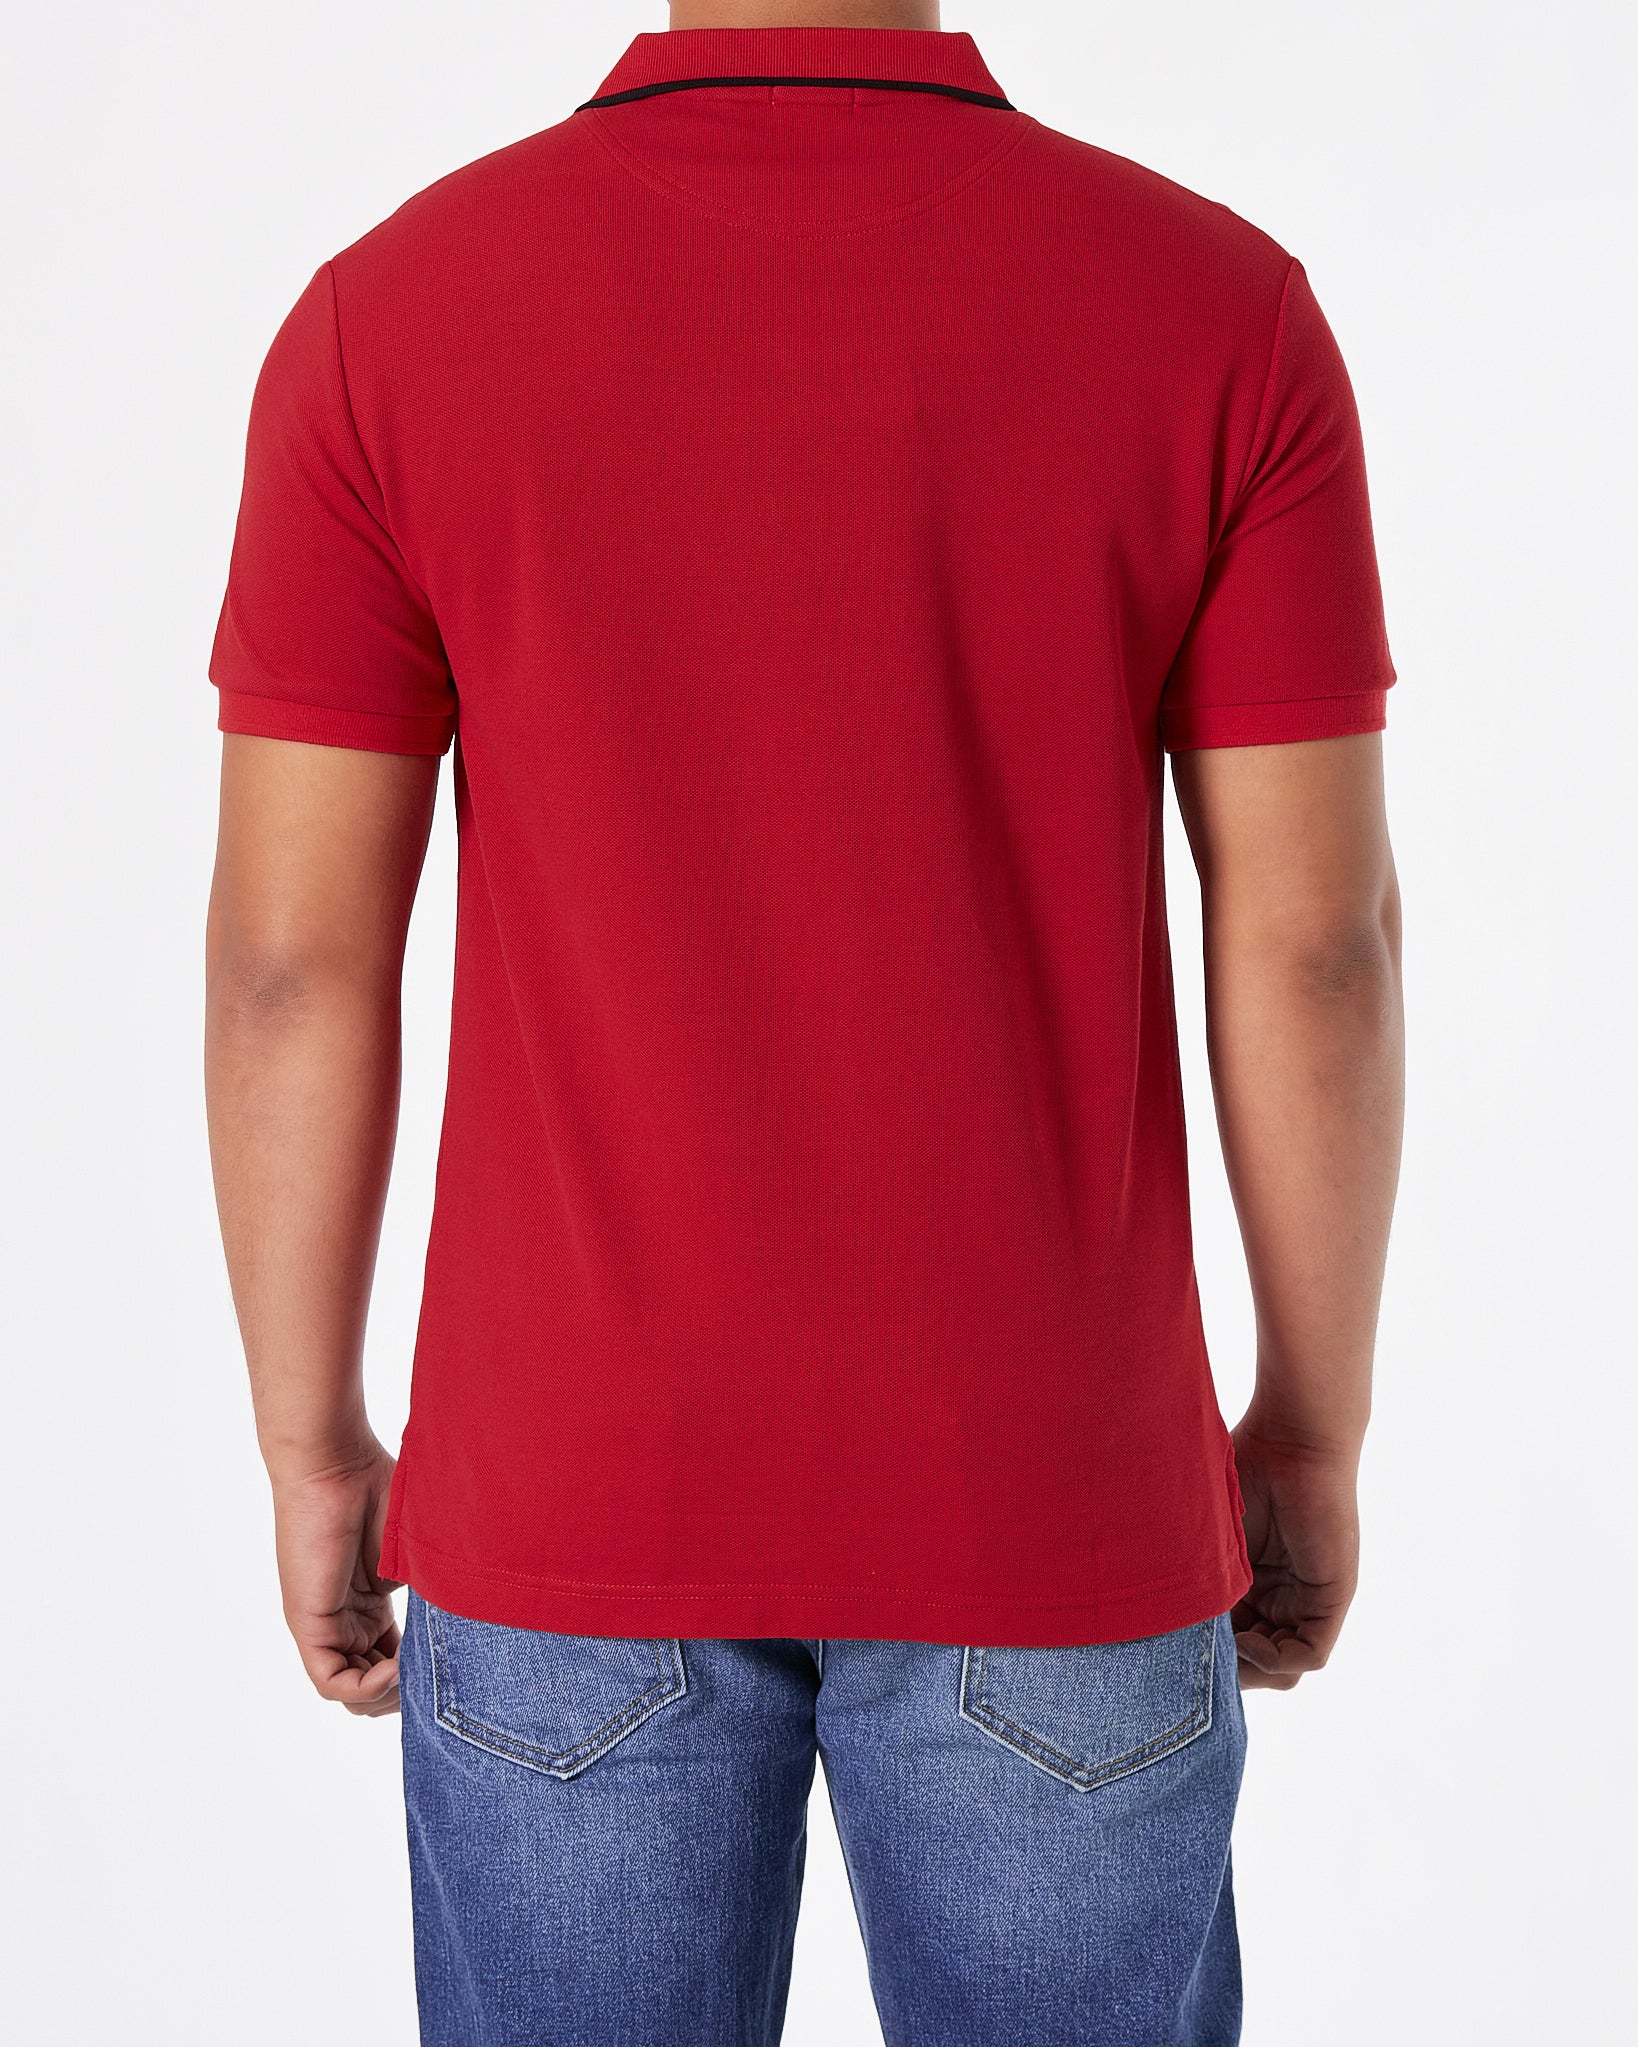 BUR TB Embroidered Men Red Polo Shirt 23.90